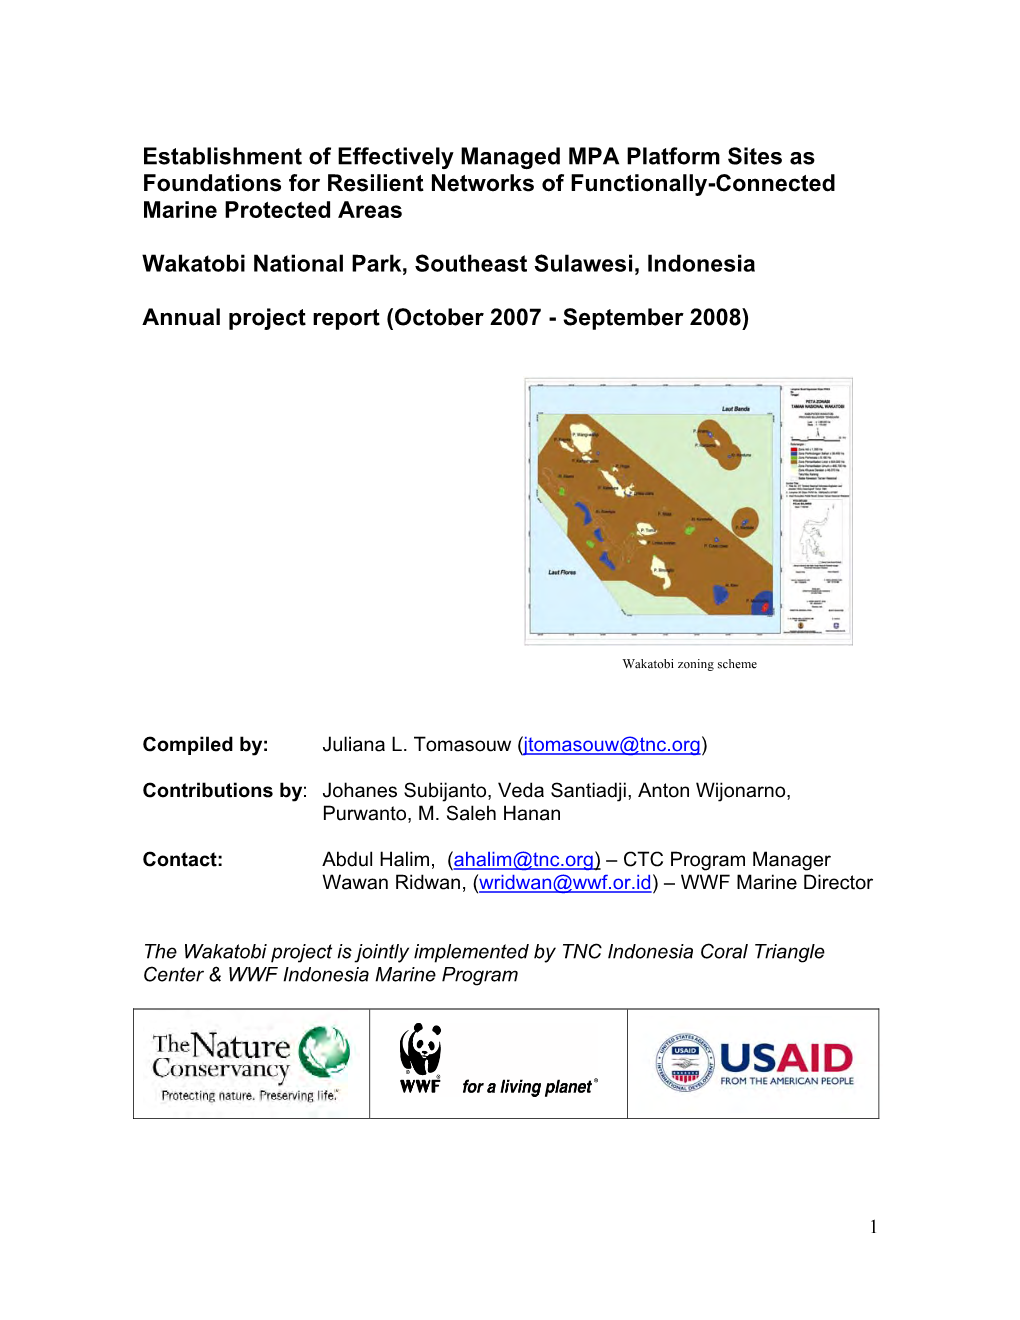 Establishment of Effectively Managed MPA Platform Sites As Foundations for Resilient Networks of Functionally-Connected Marine Protected Areas